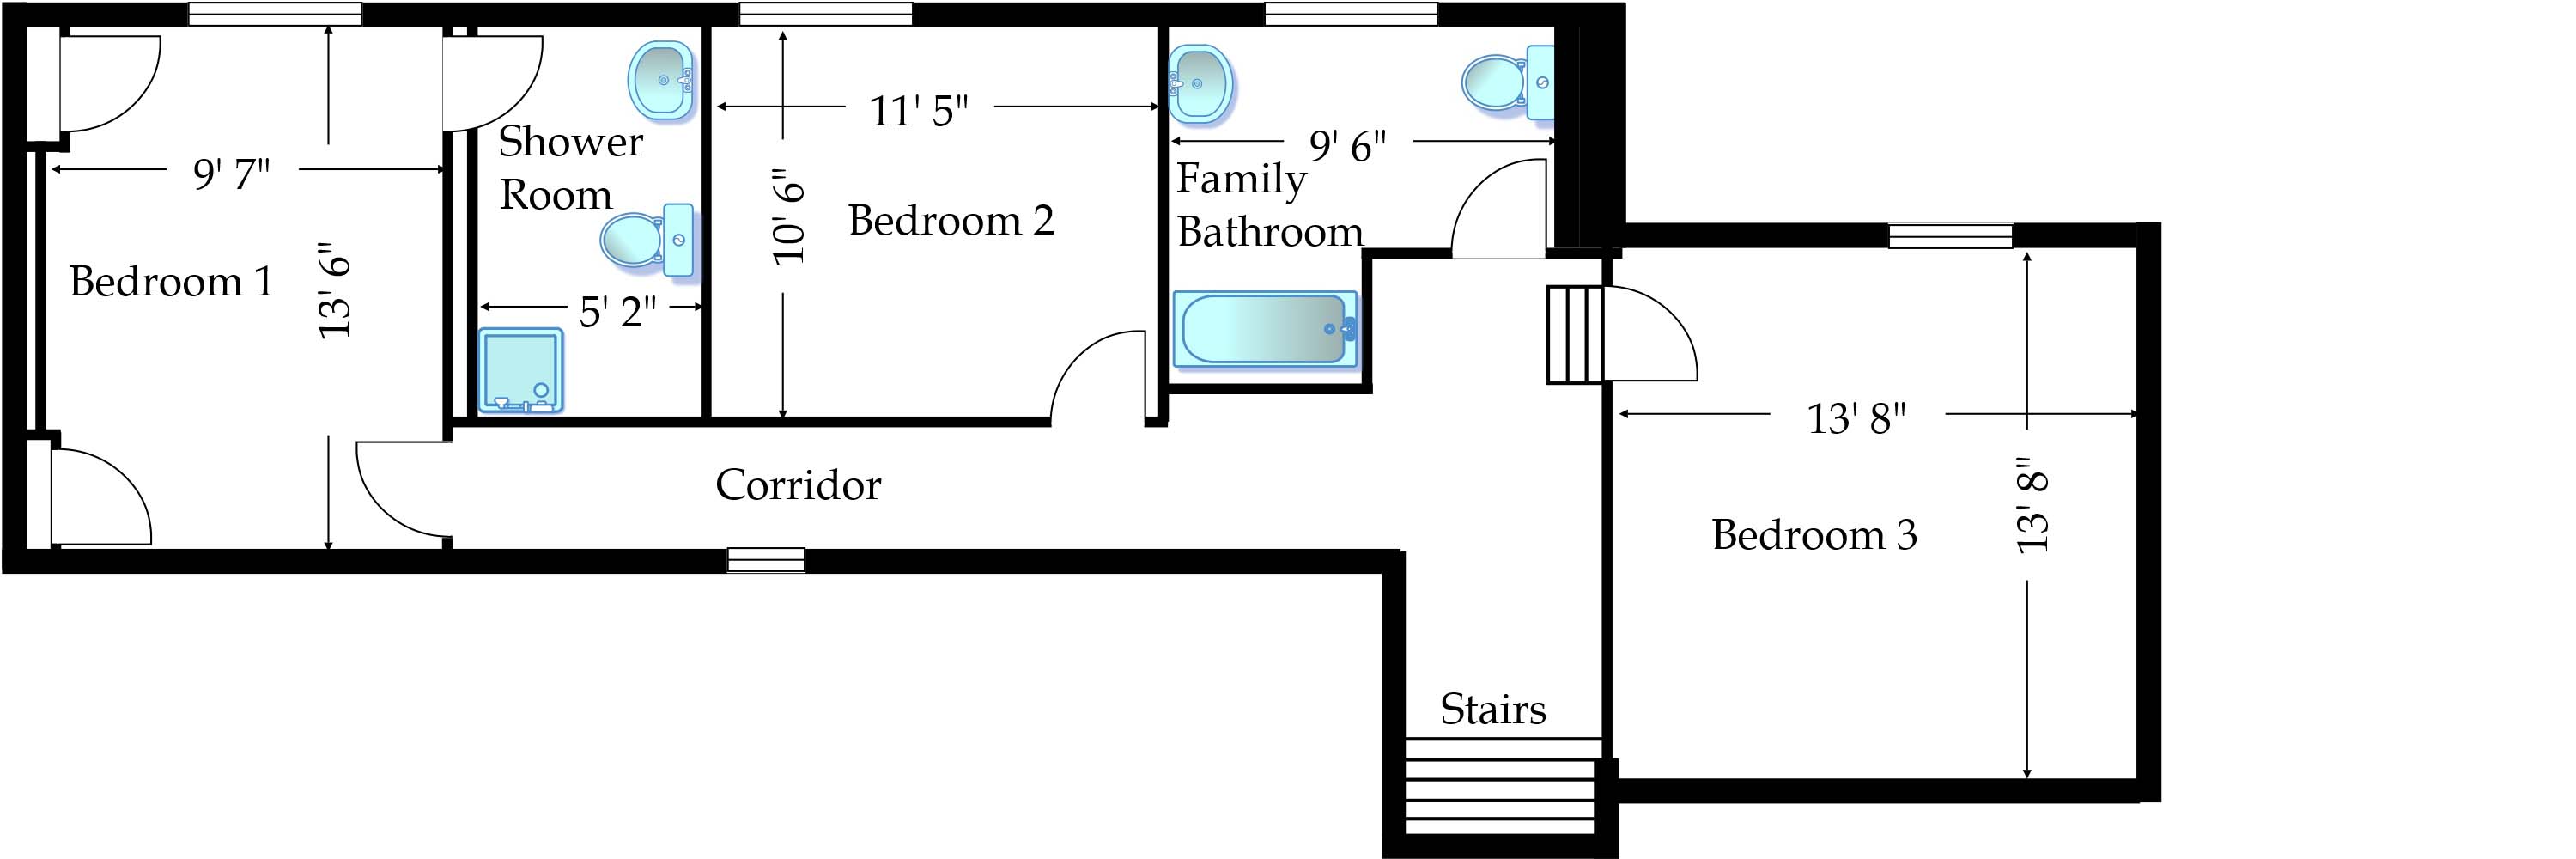 Harry's House First Floor Layout Plan